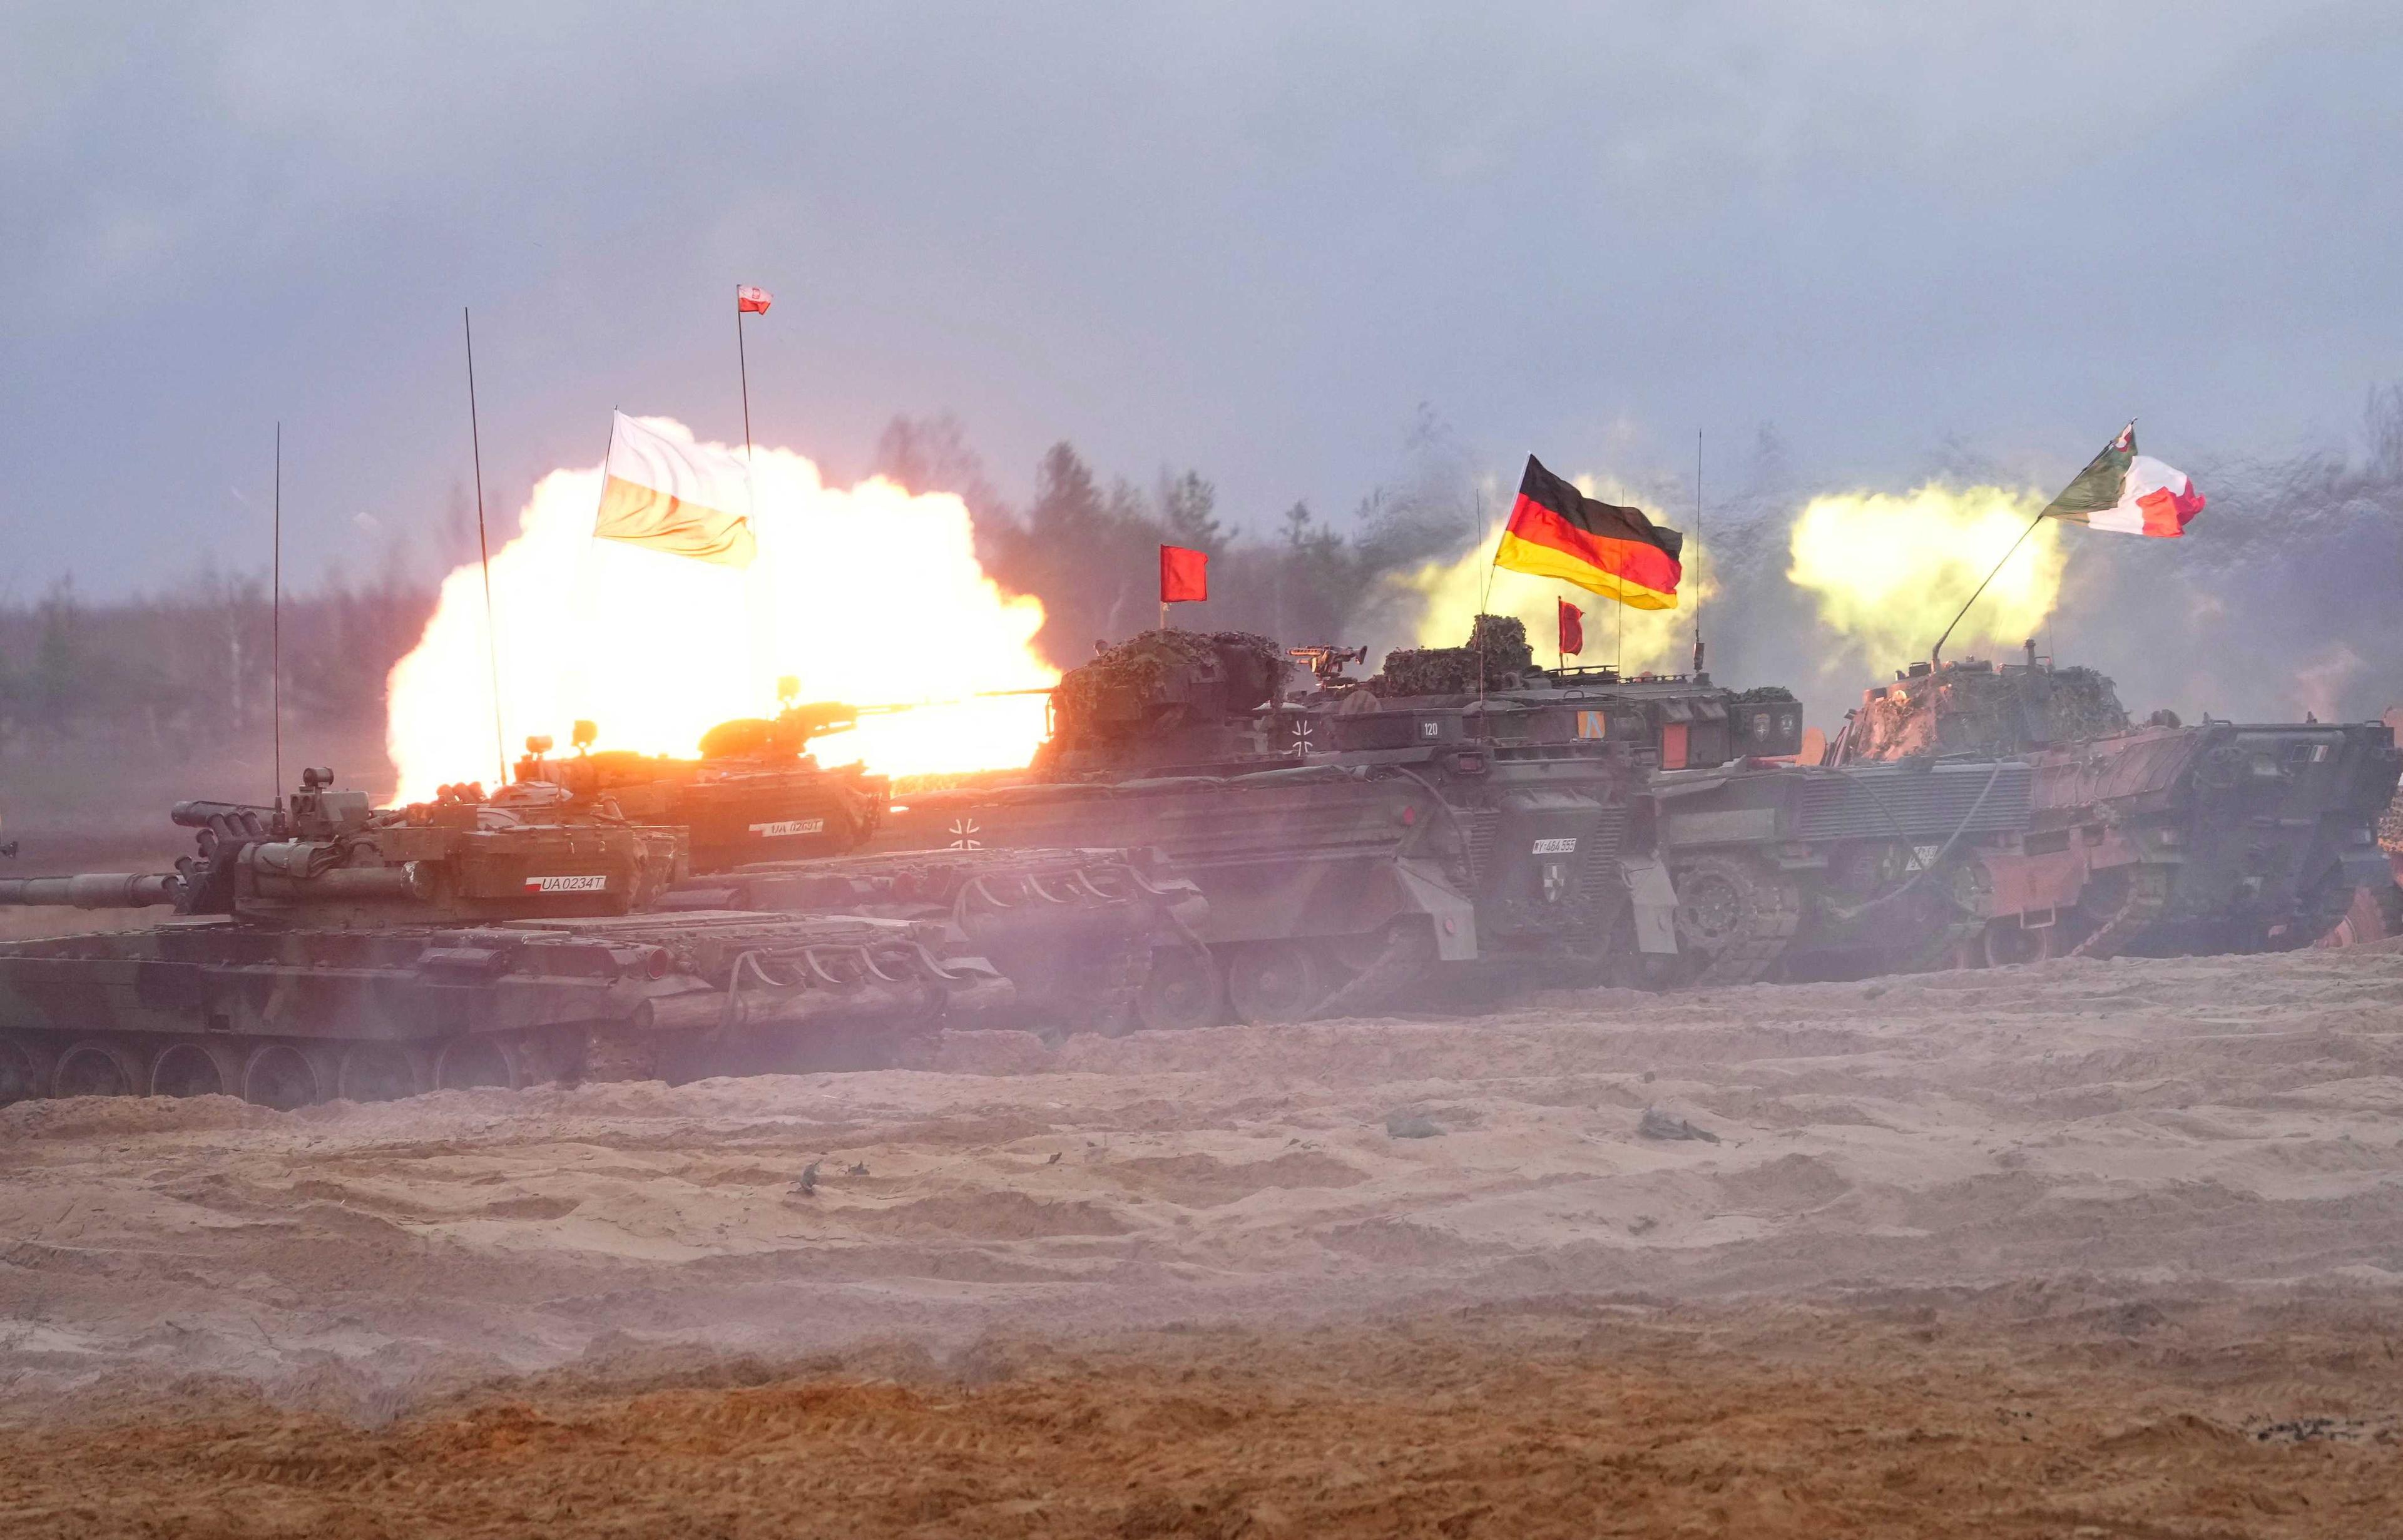 Polish, German and Italian tanks of Nato Enhanced Forward Presence battle groups attend live fire exercise, during Iron Spear 2022 military drill in Adazi, Latvia Nov 15. Photo: Reuters